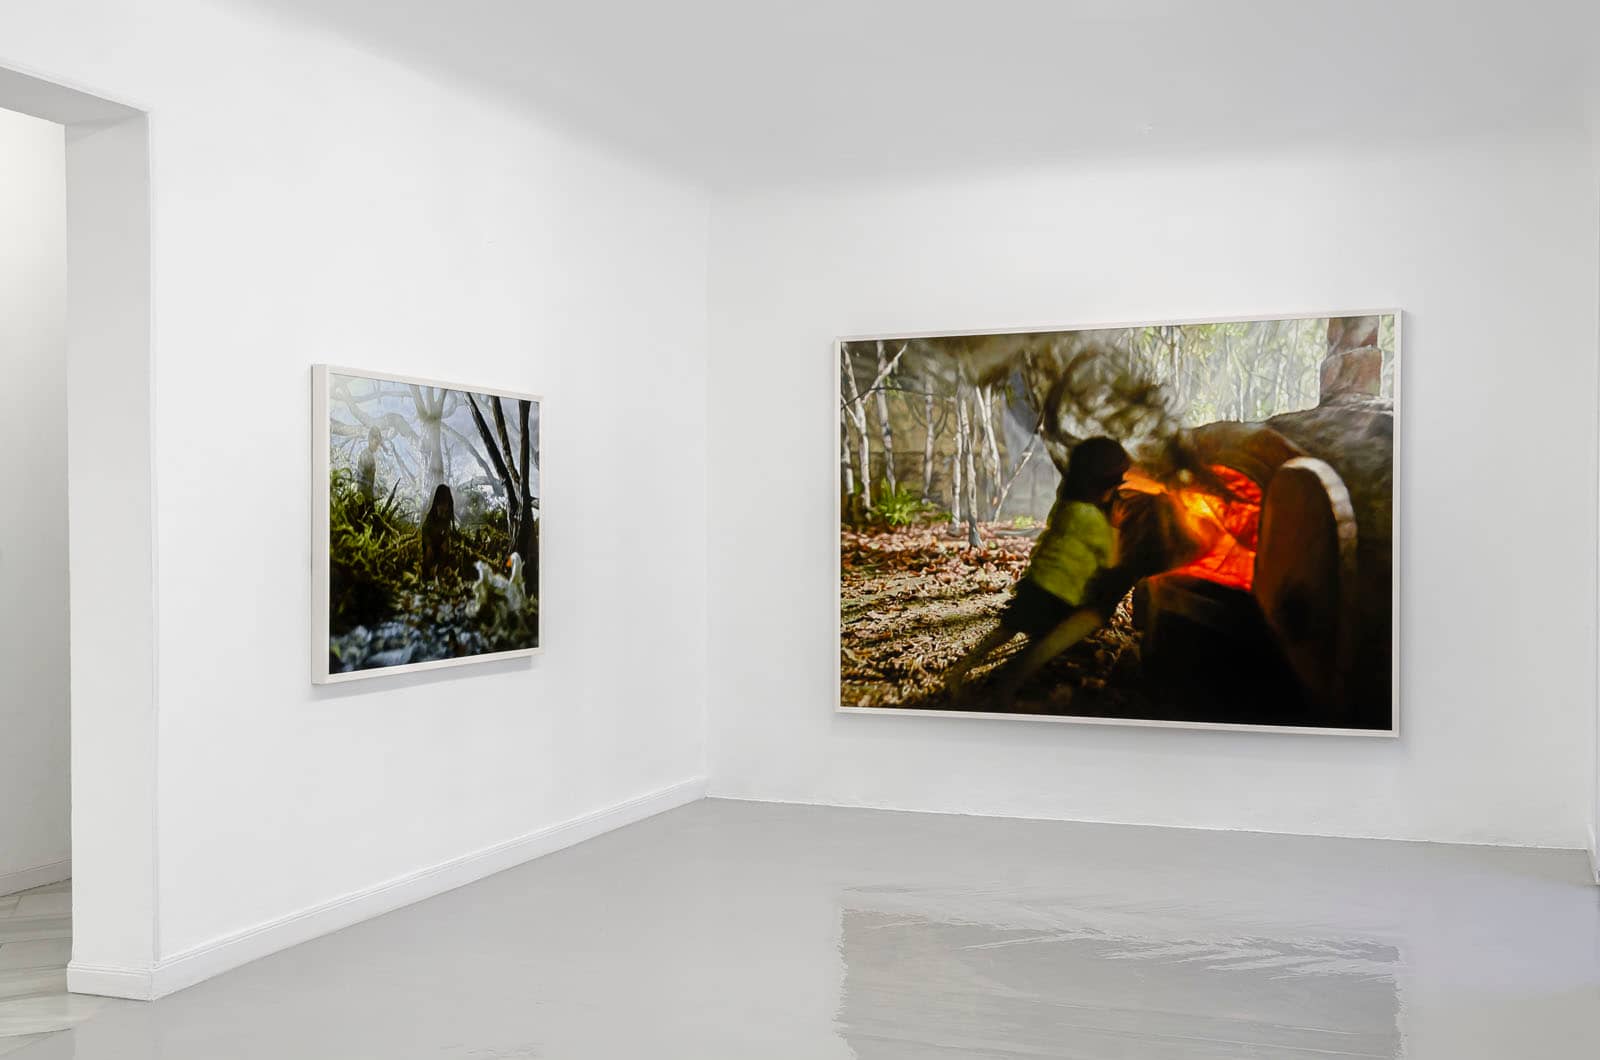 Exhibition view of Philipp Fröhlich's solo show "Hänsel y Gretel" at Juana de Aizpuru gallery in Madrid, 2019. Four oil paintings showing scenes from the fairy tale by the brothers Grimm are seen in the photography.